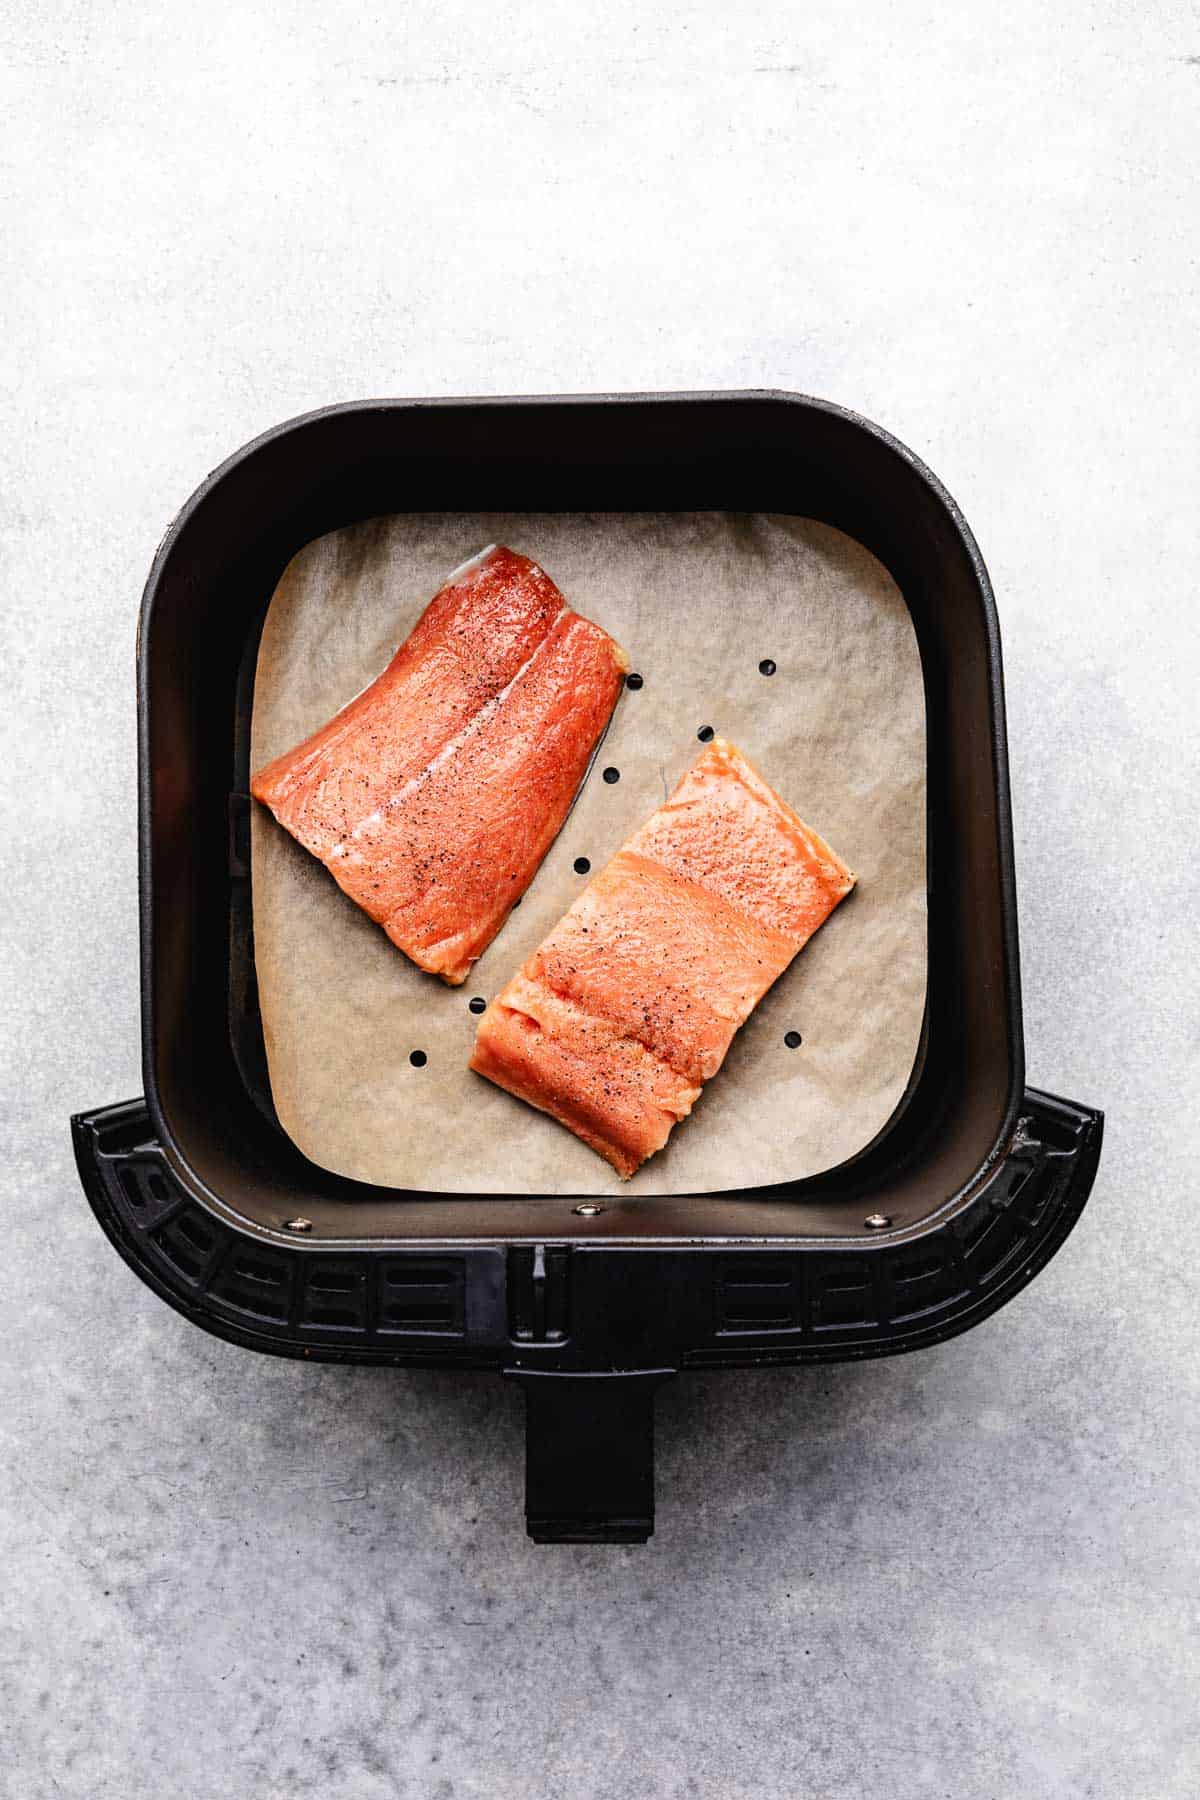 Two uncooked salmon filets in a basket.